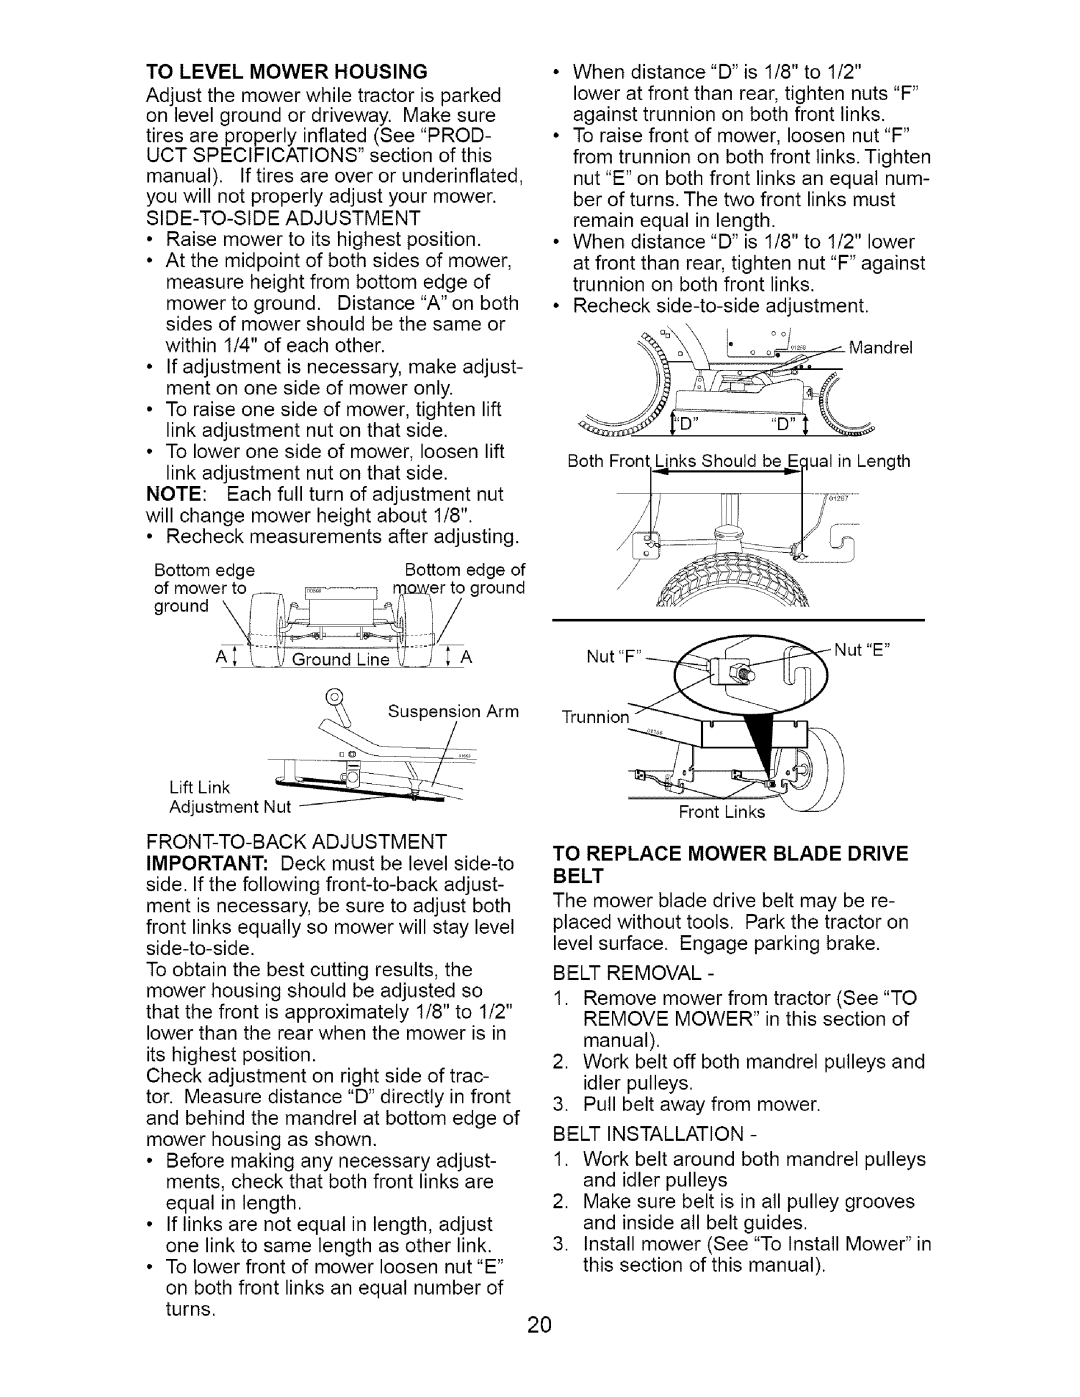 Craftsman 917.275632 manual To Level Mower Housing, fromO_e_t F, To Replace Mower Blade Drive Belt 